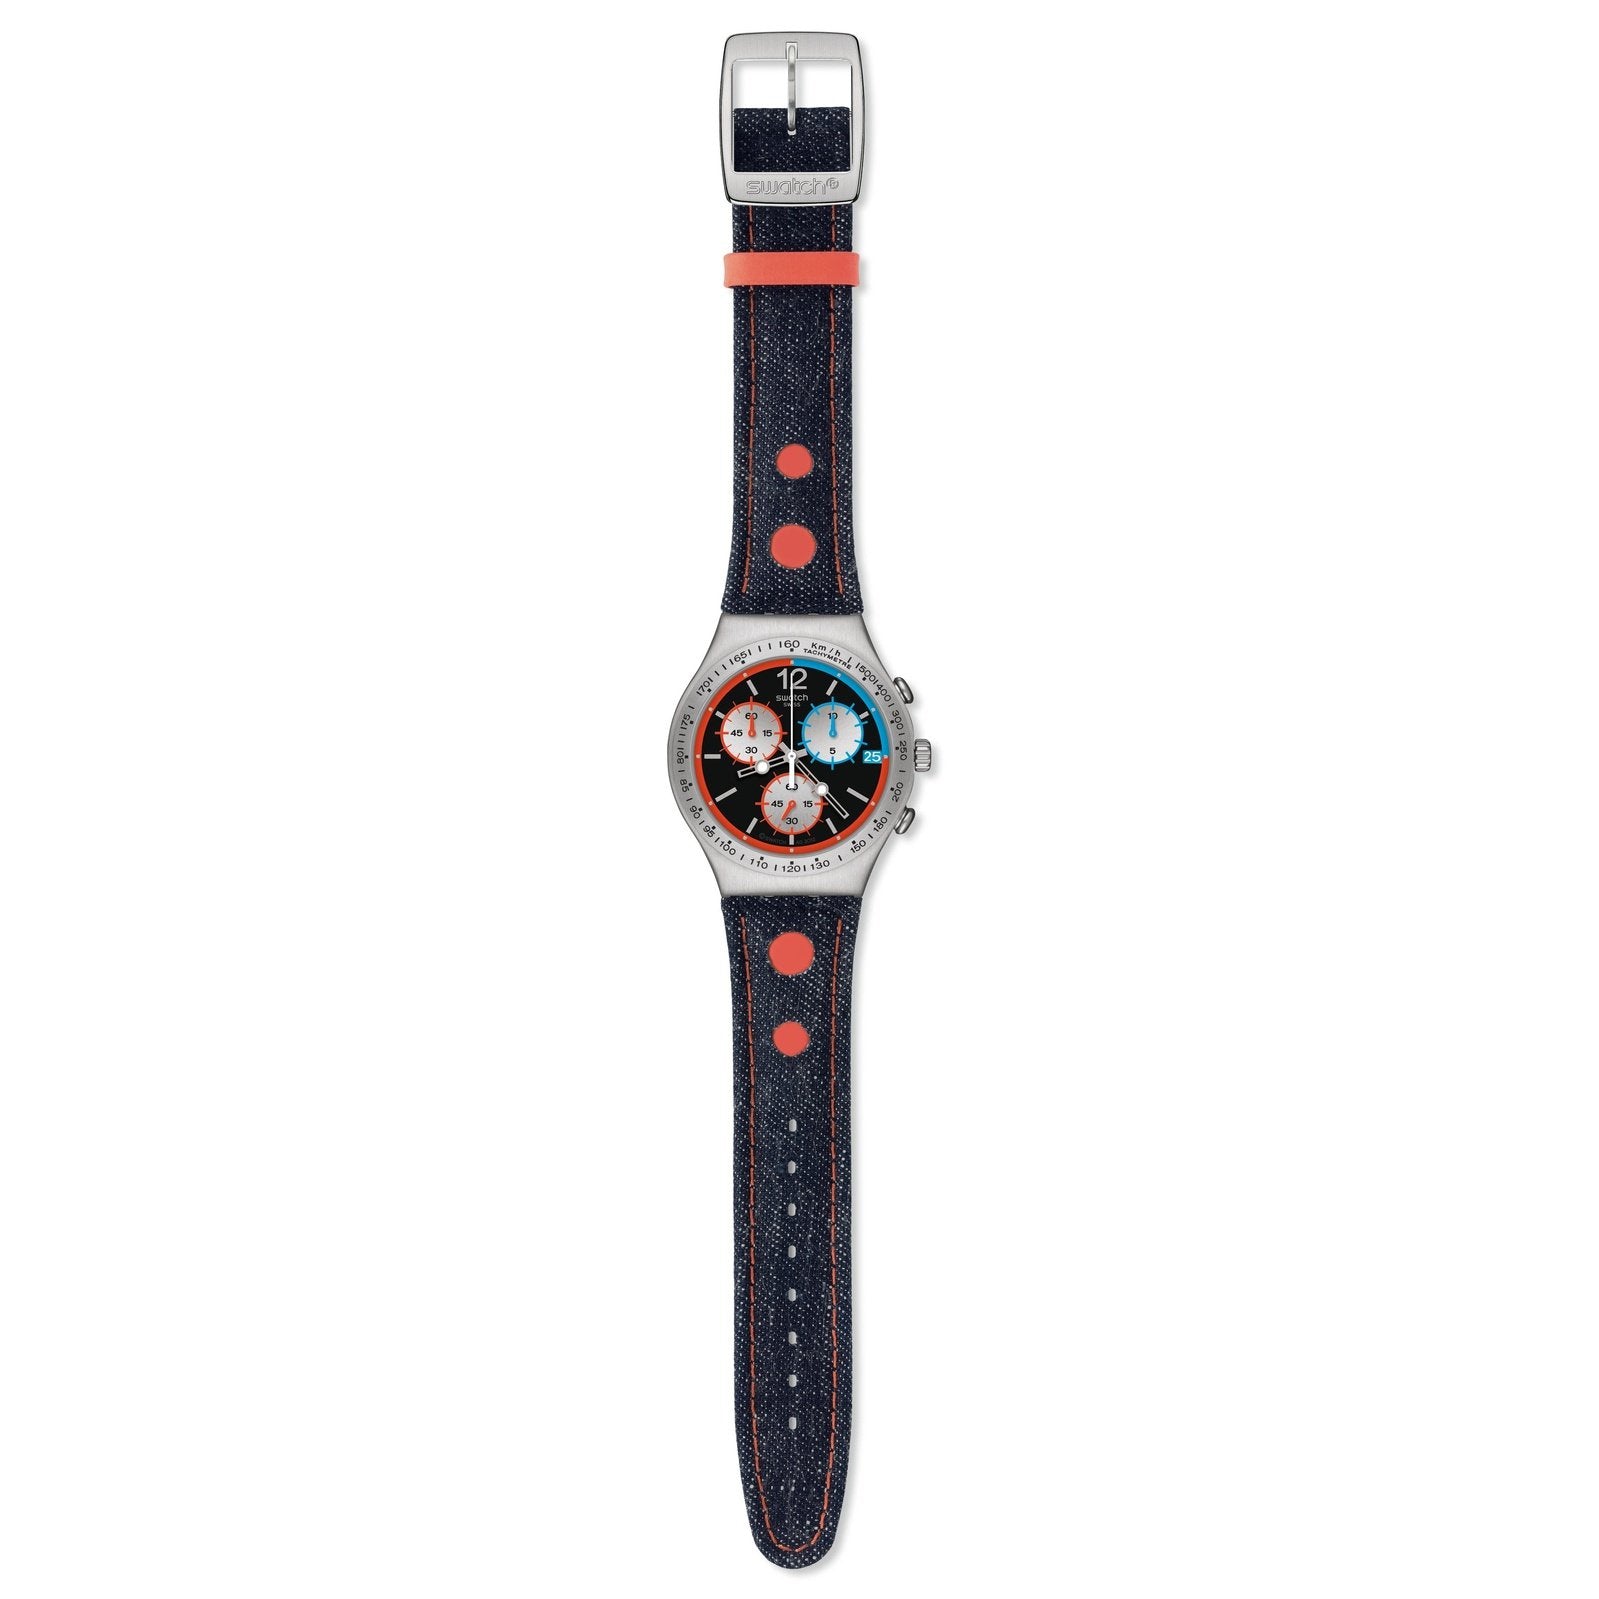 SINCE 2013 Swatch